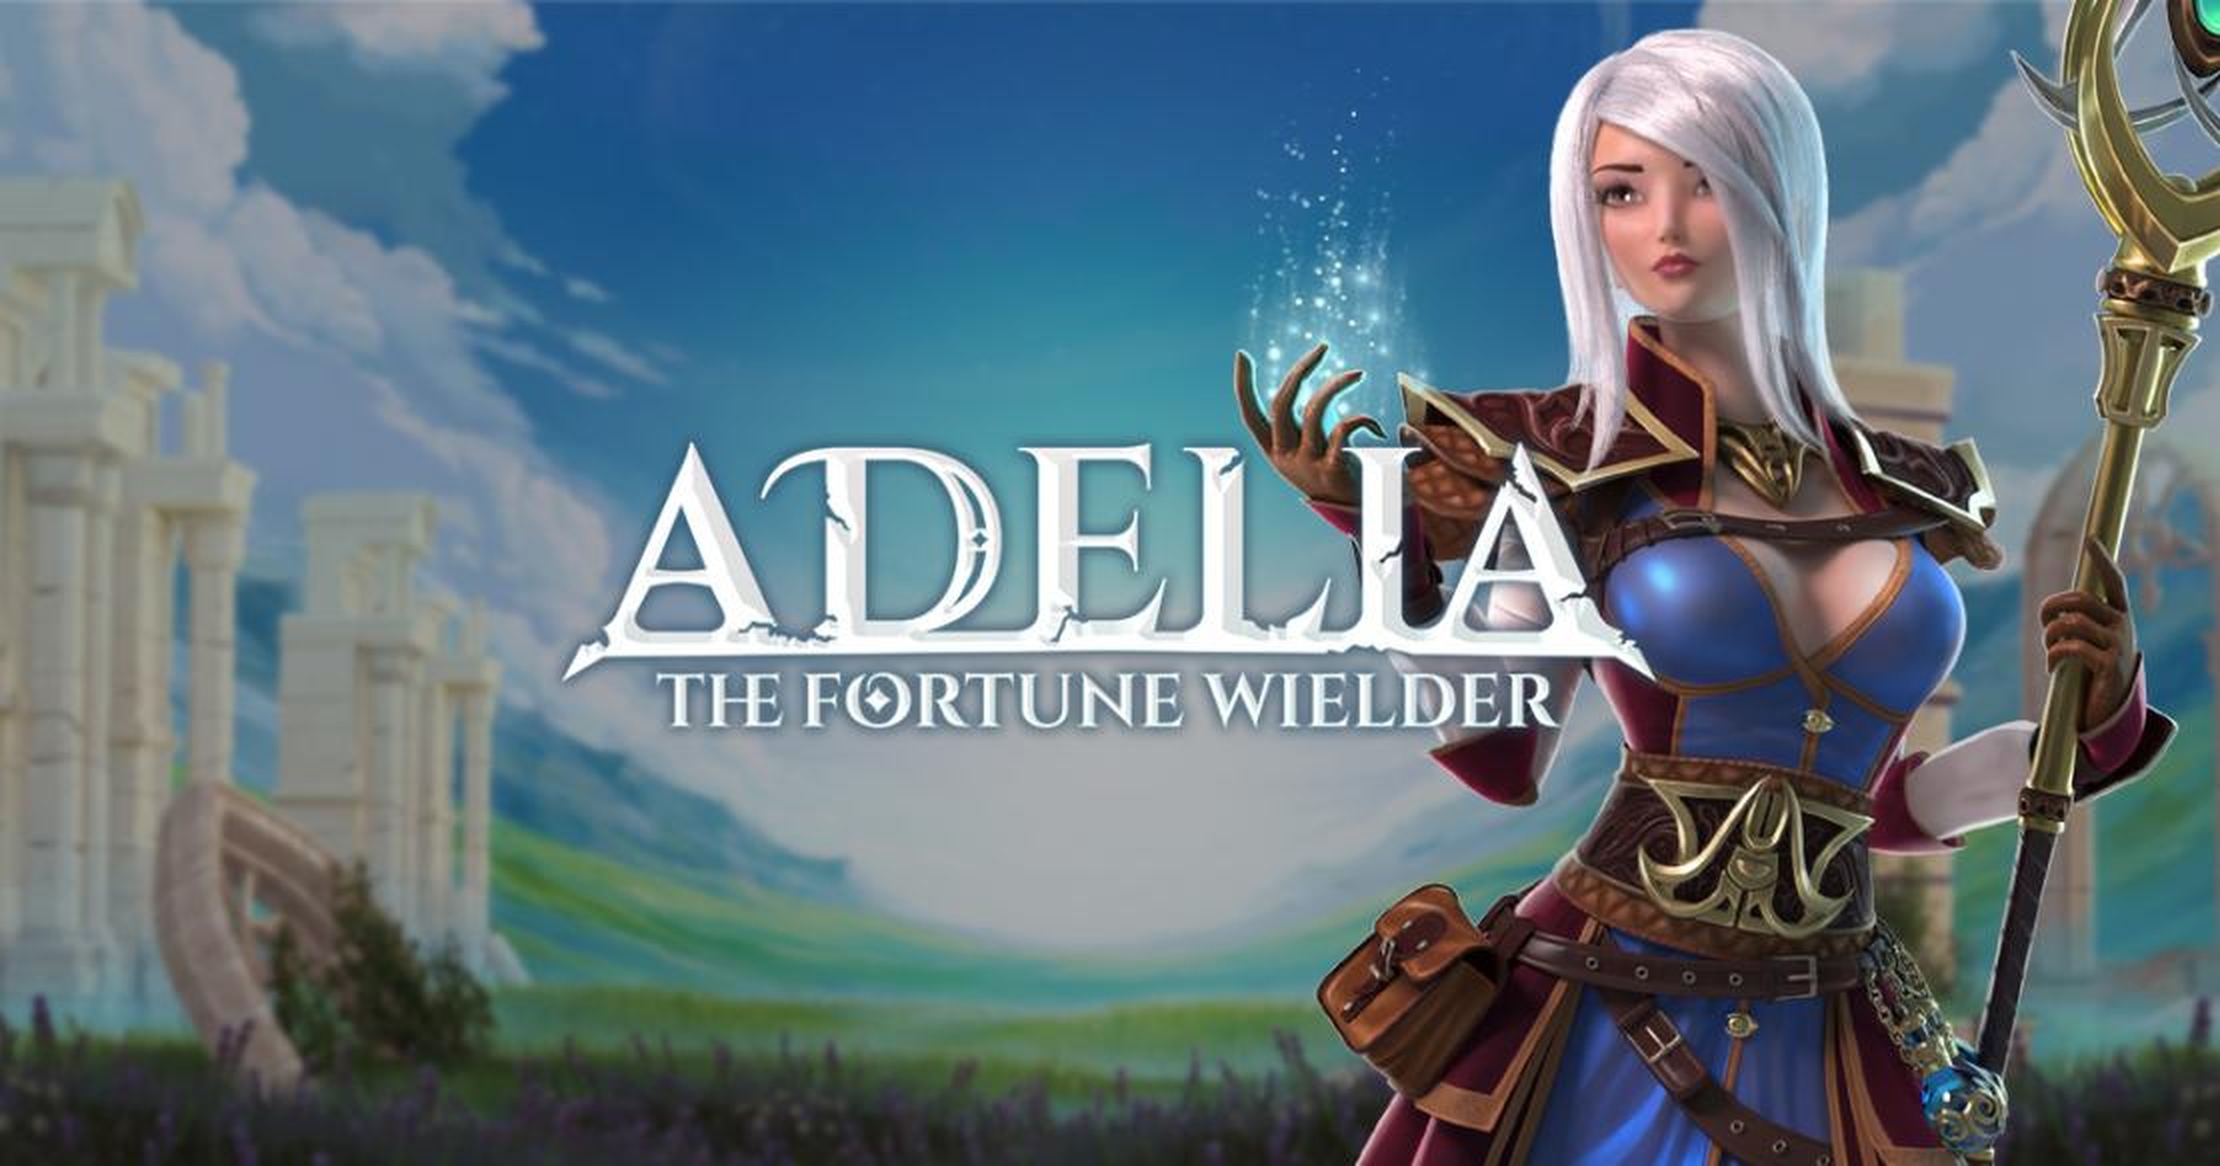 The Adelia The Fortune Wielder Online Slot Demo Game by Foxium